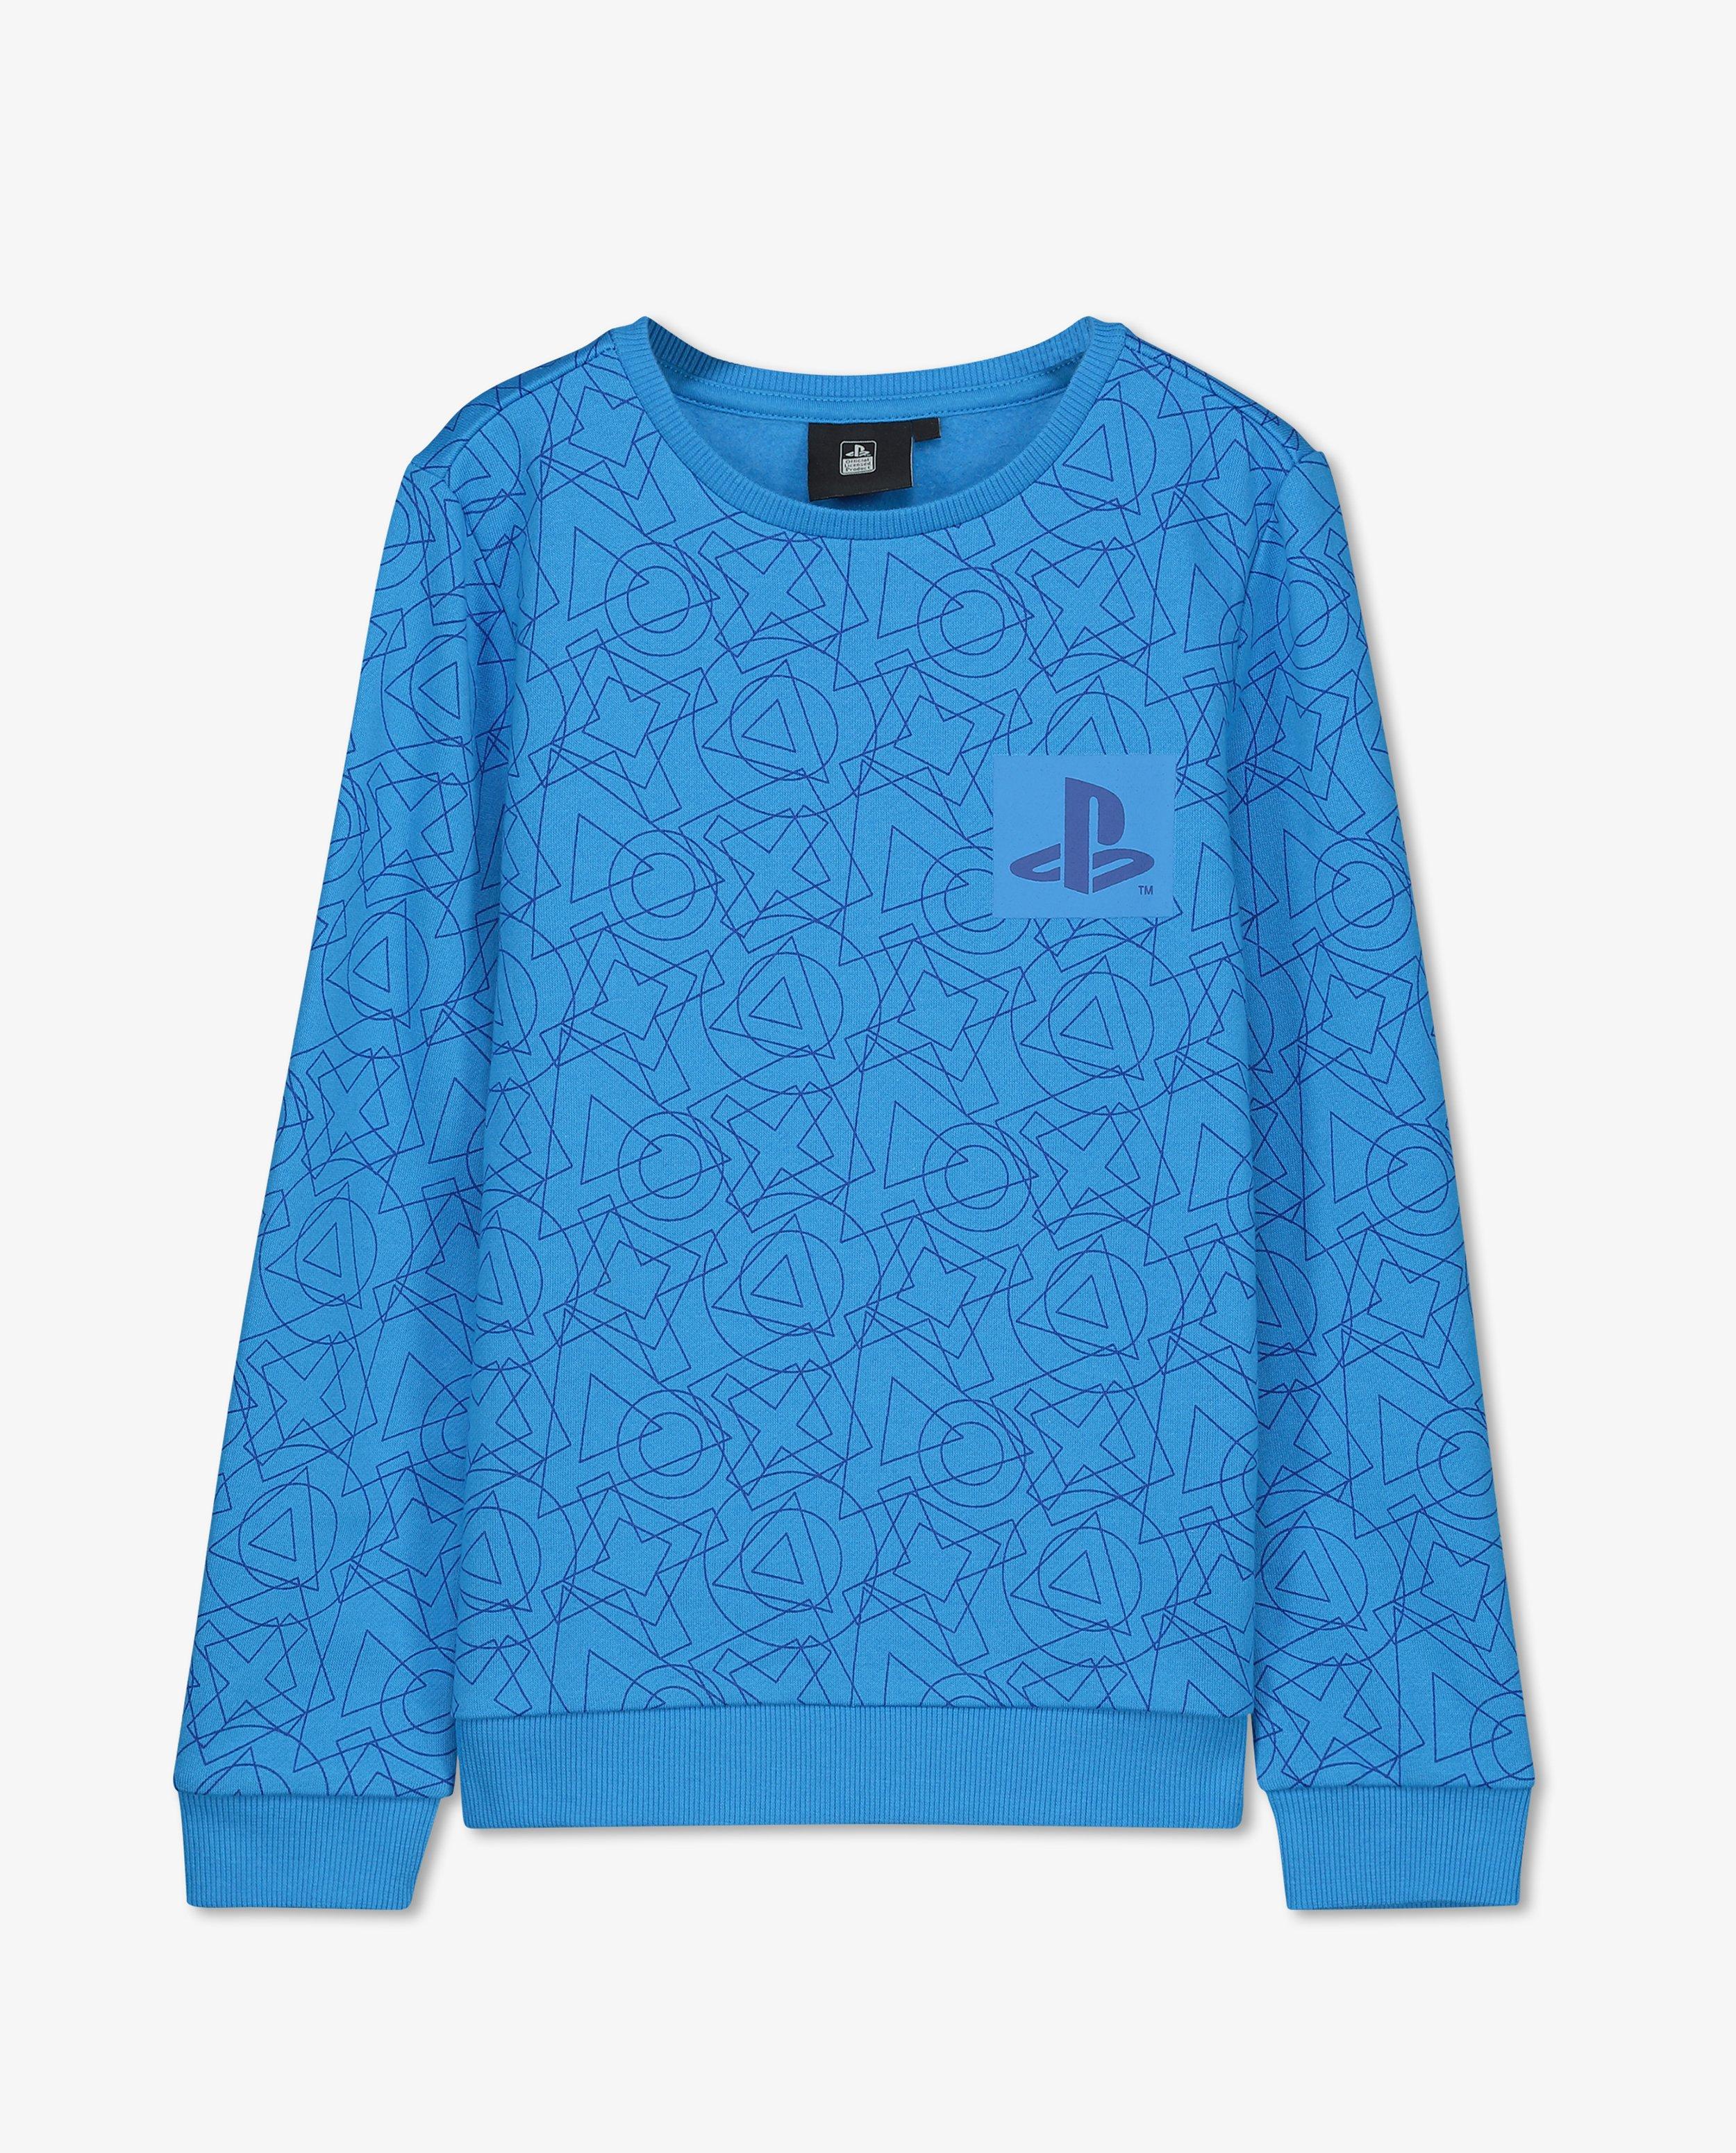 Unisex PlayStation-sweater - null - Playstation